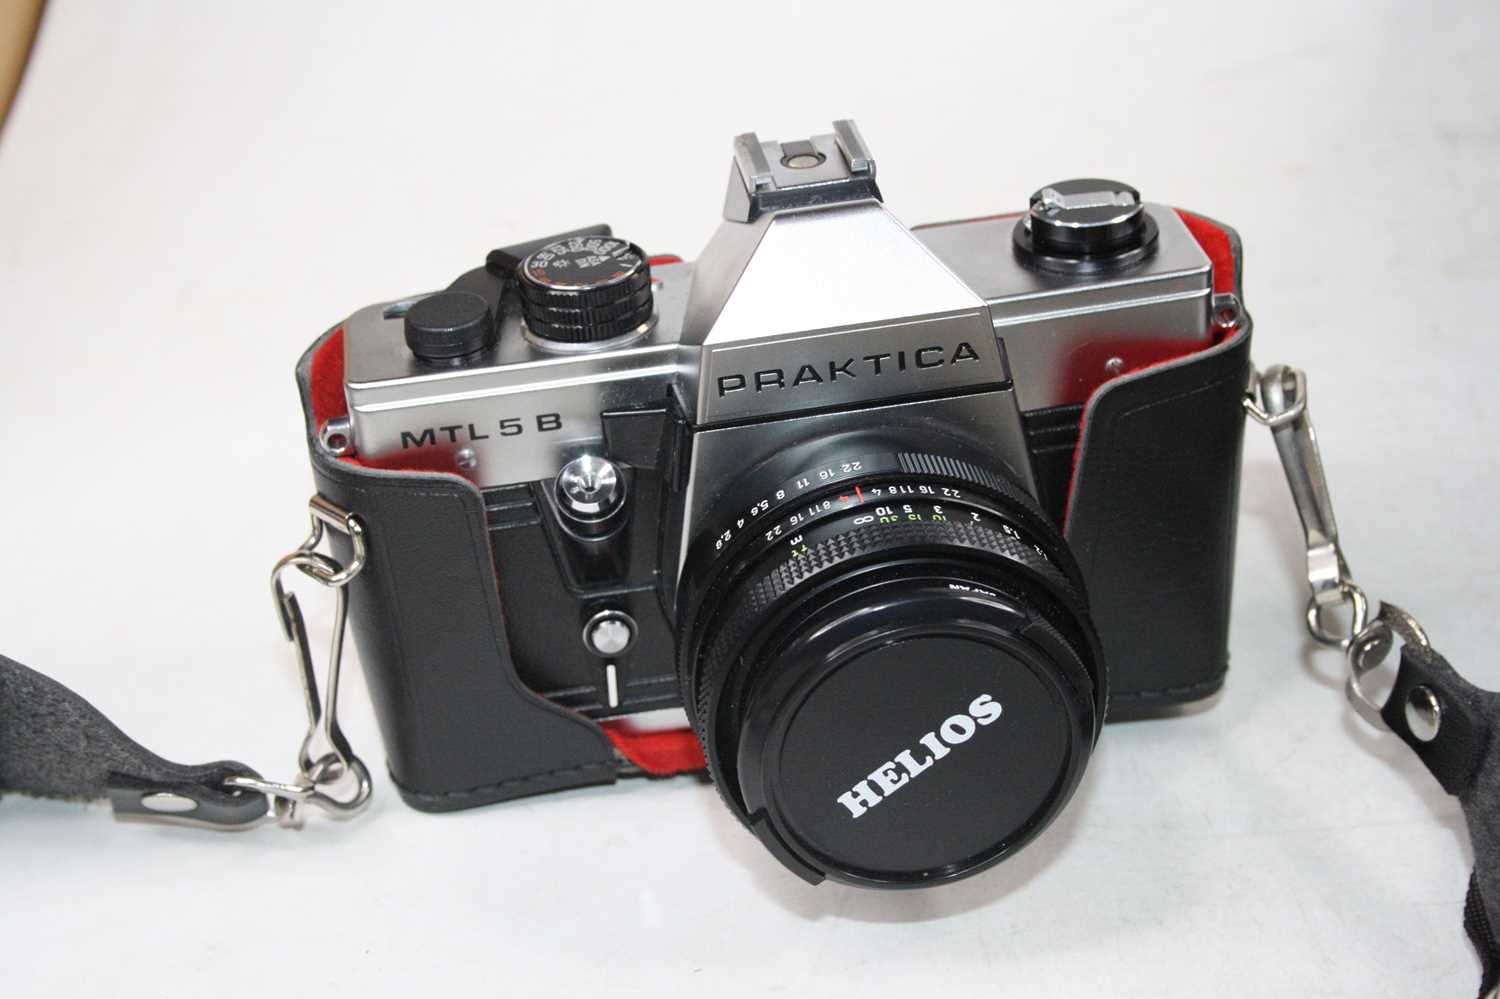 A Praktica MTL 5B camera; with an Aroma 50mm lens in camera bag - Image 3 of 5